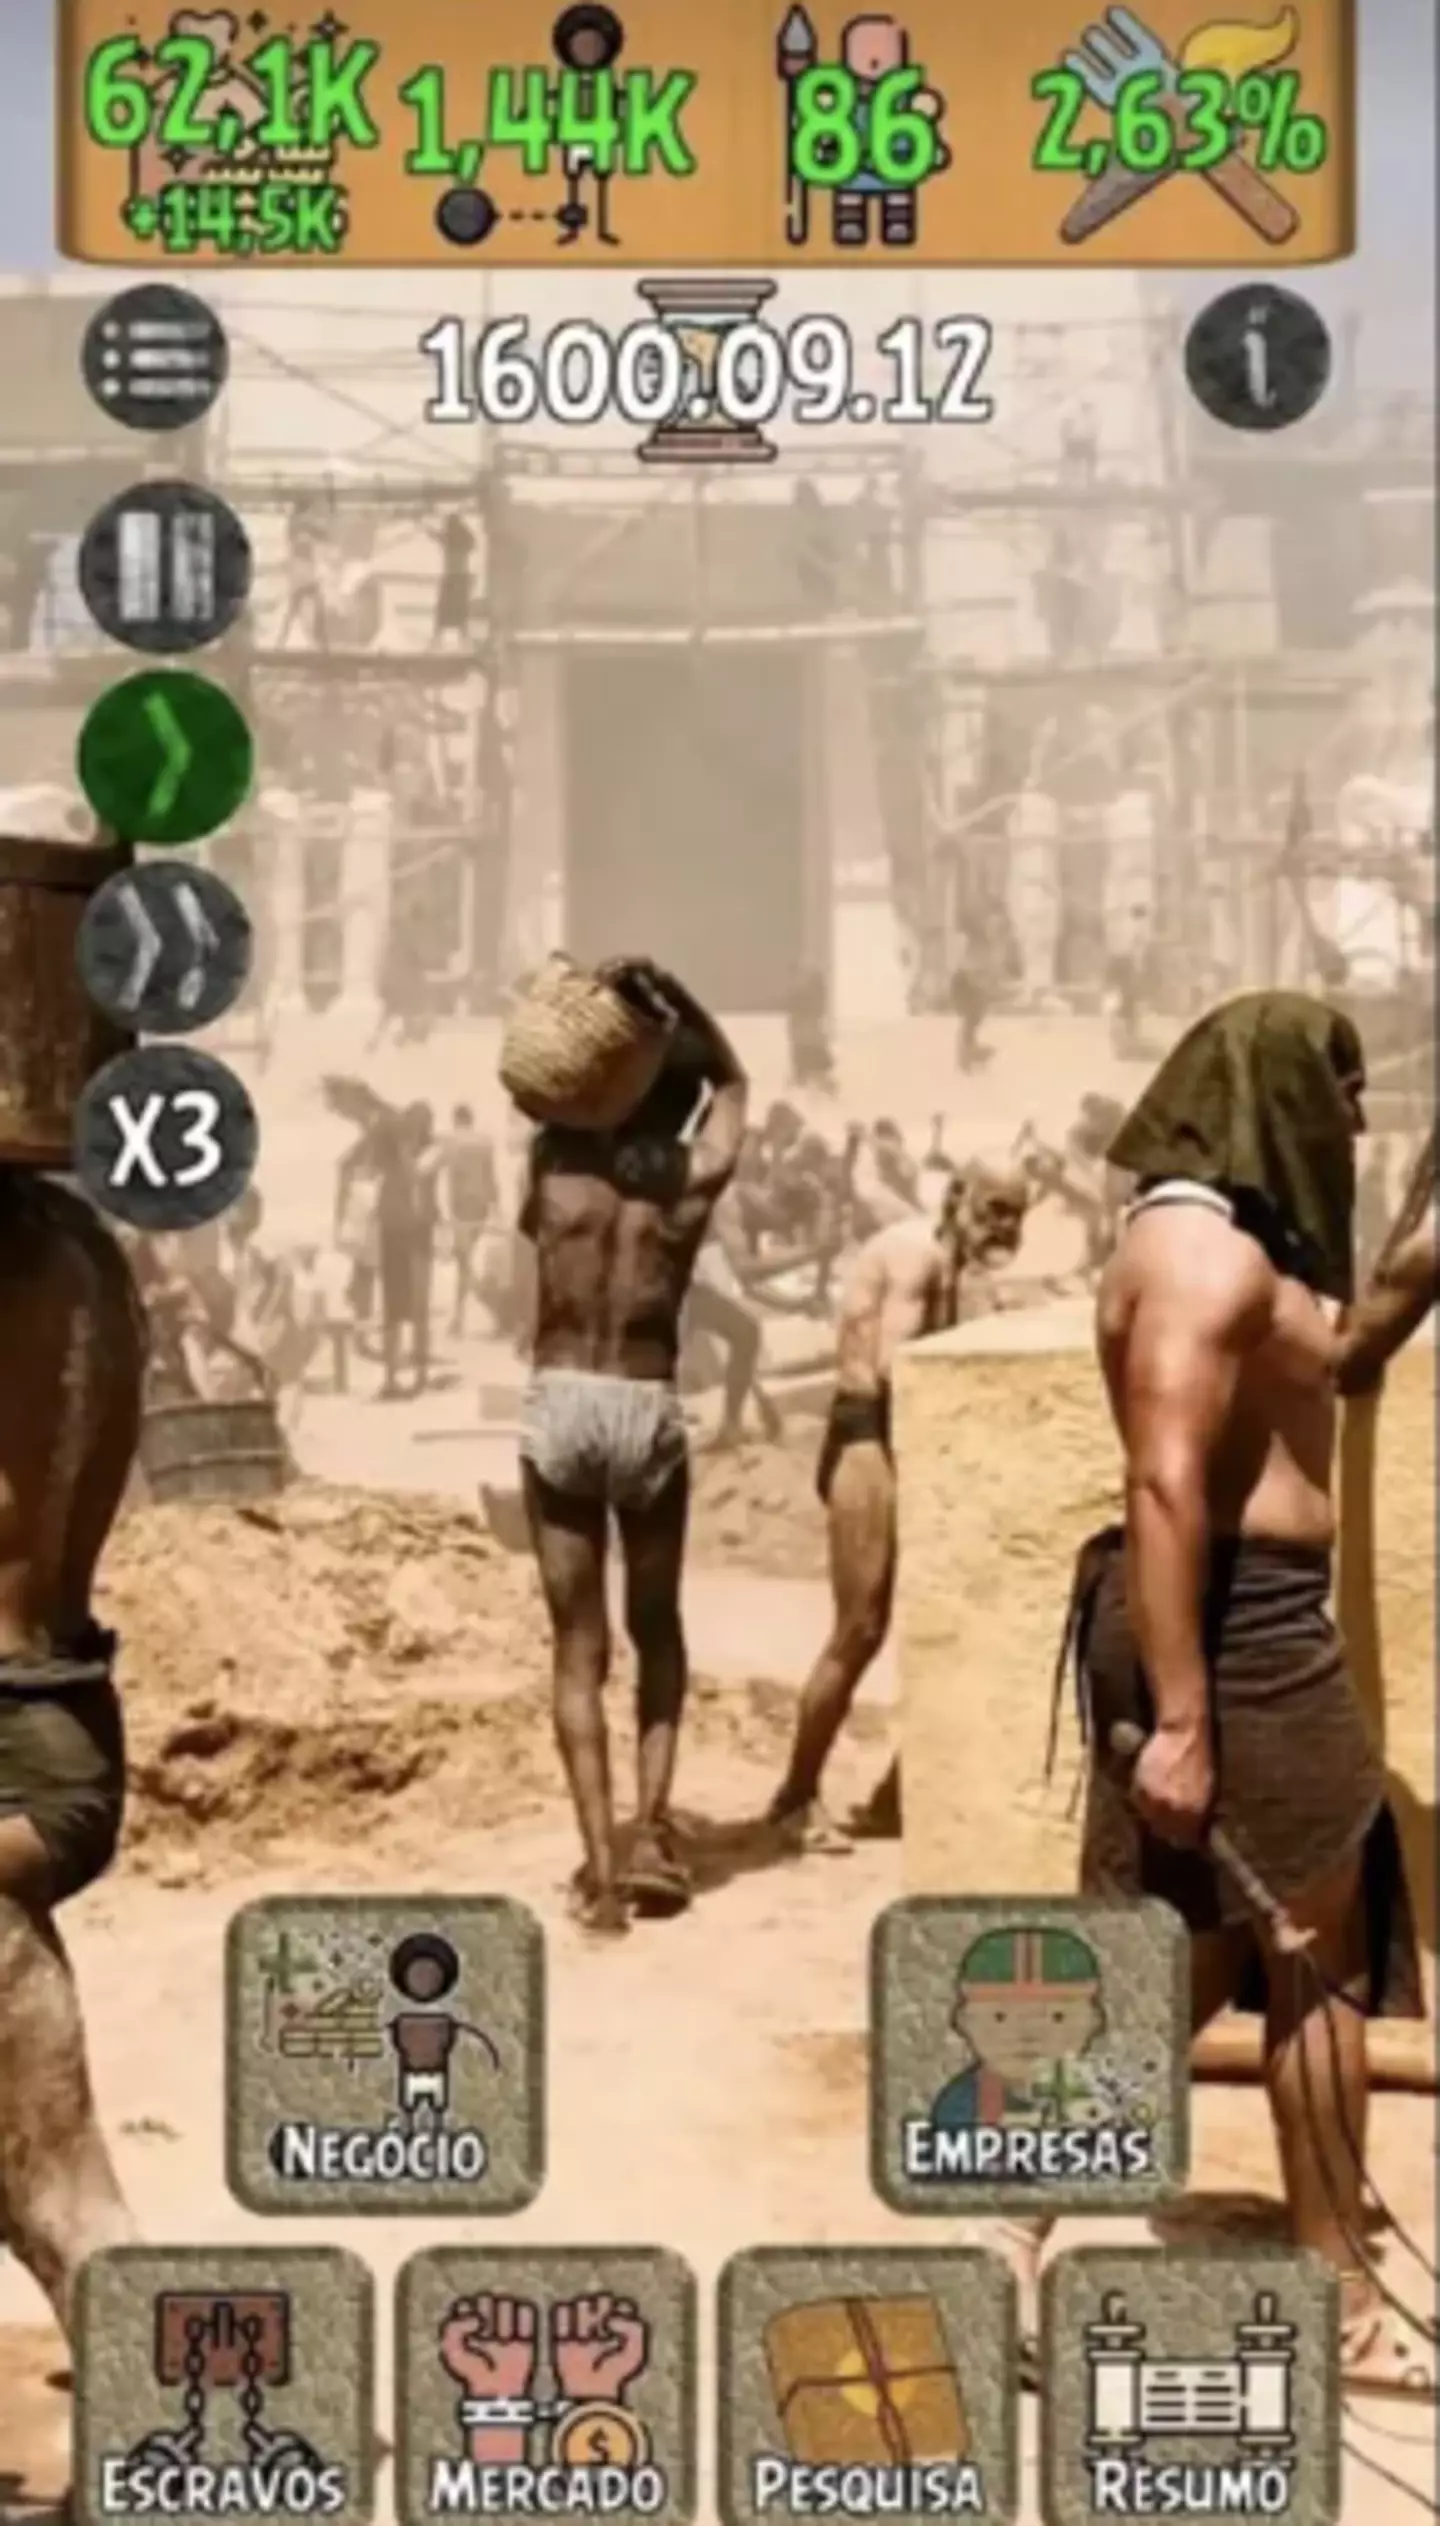 A still showing gameplay.